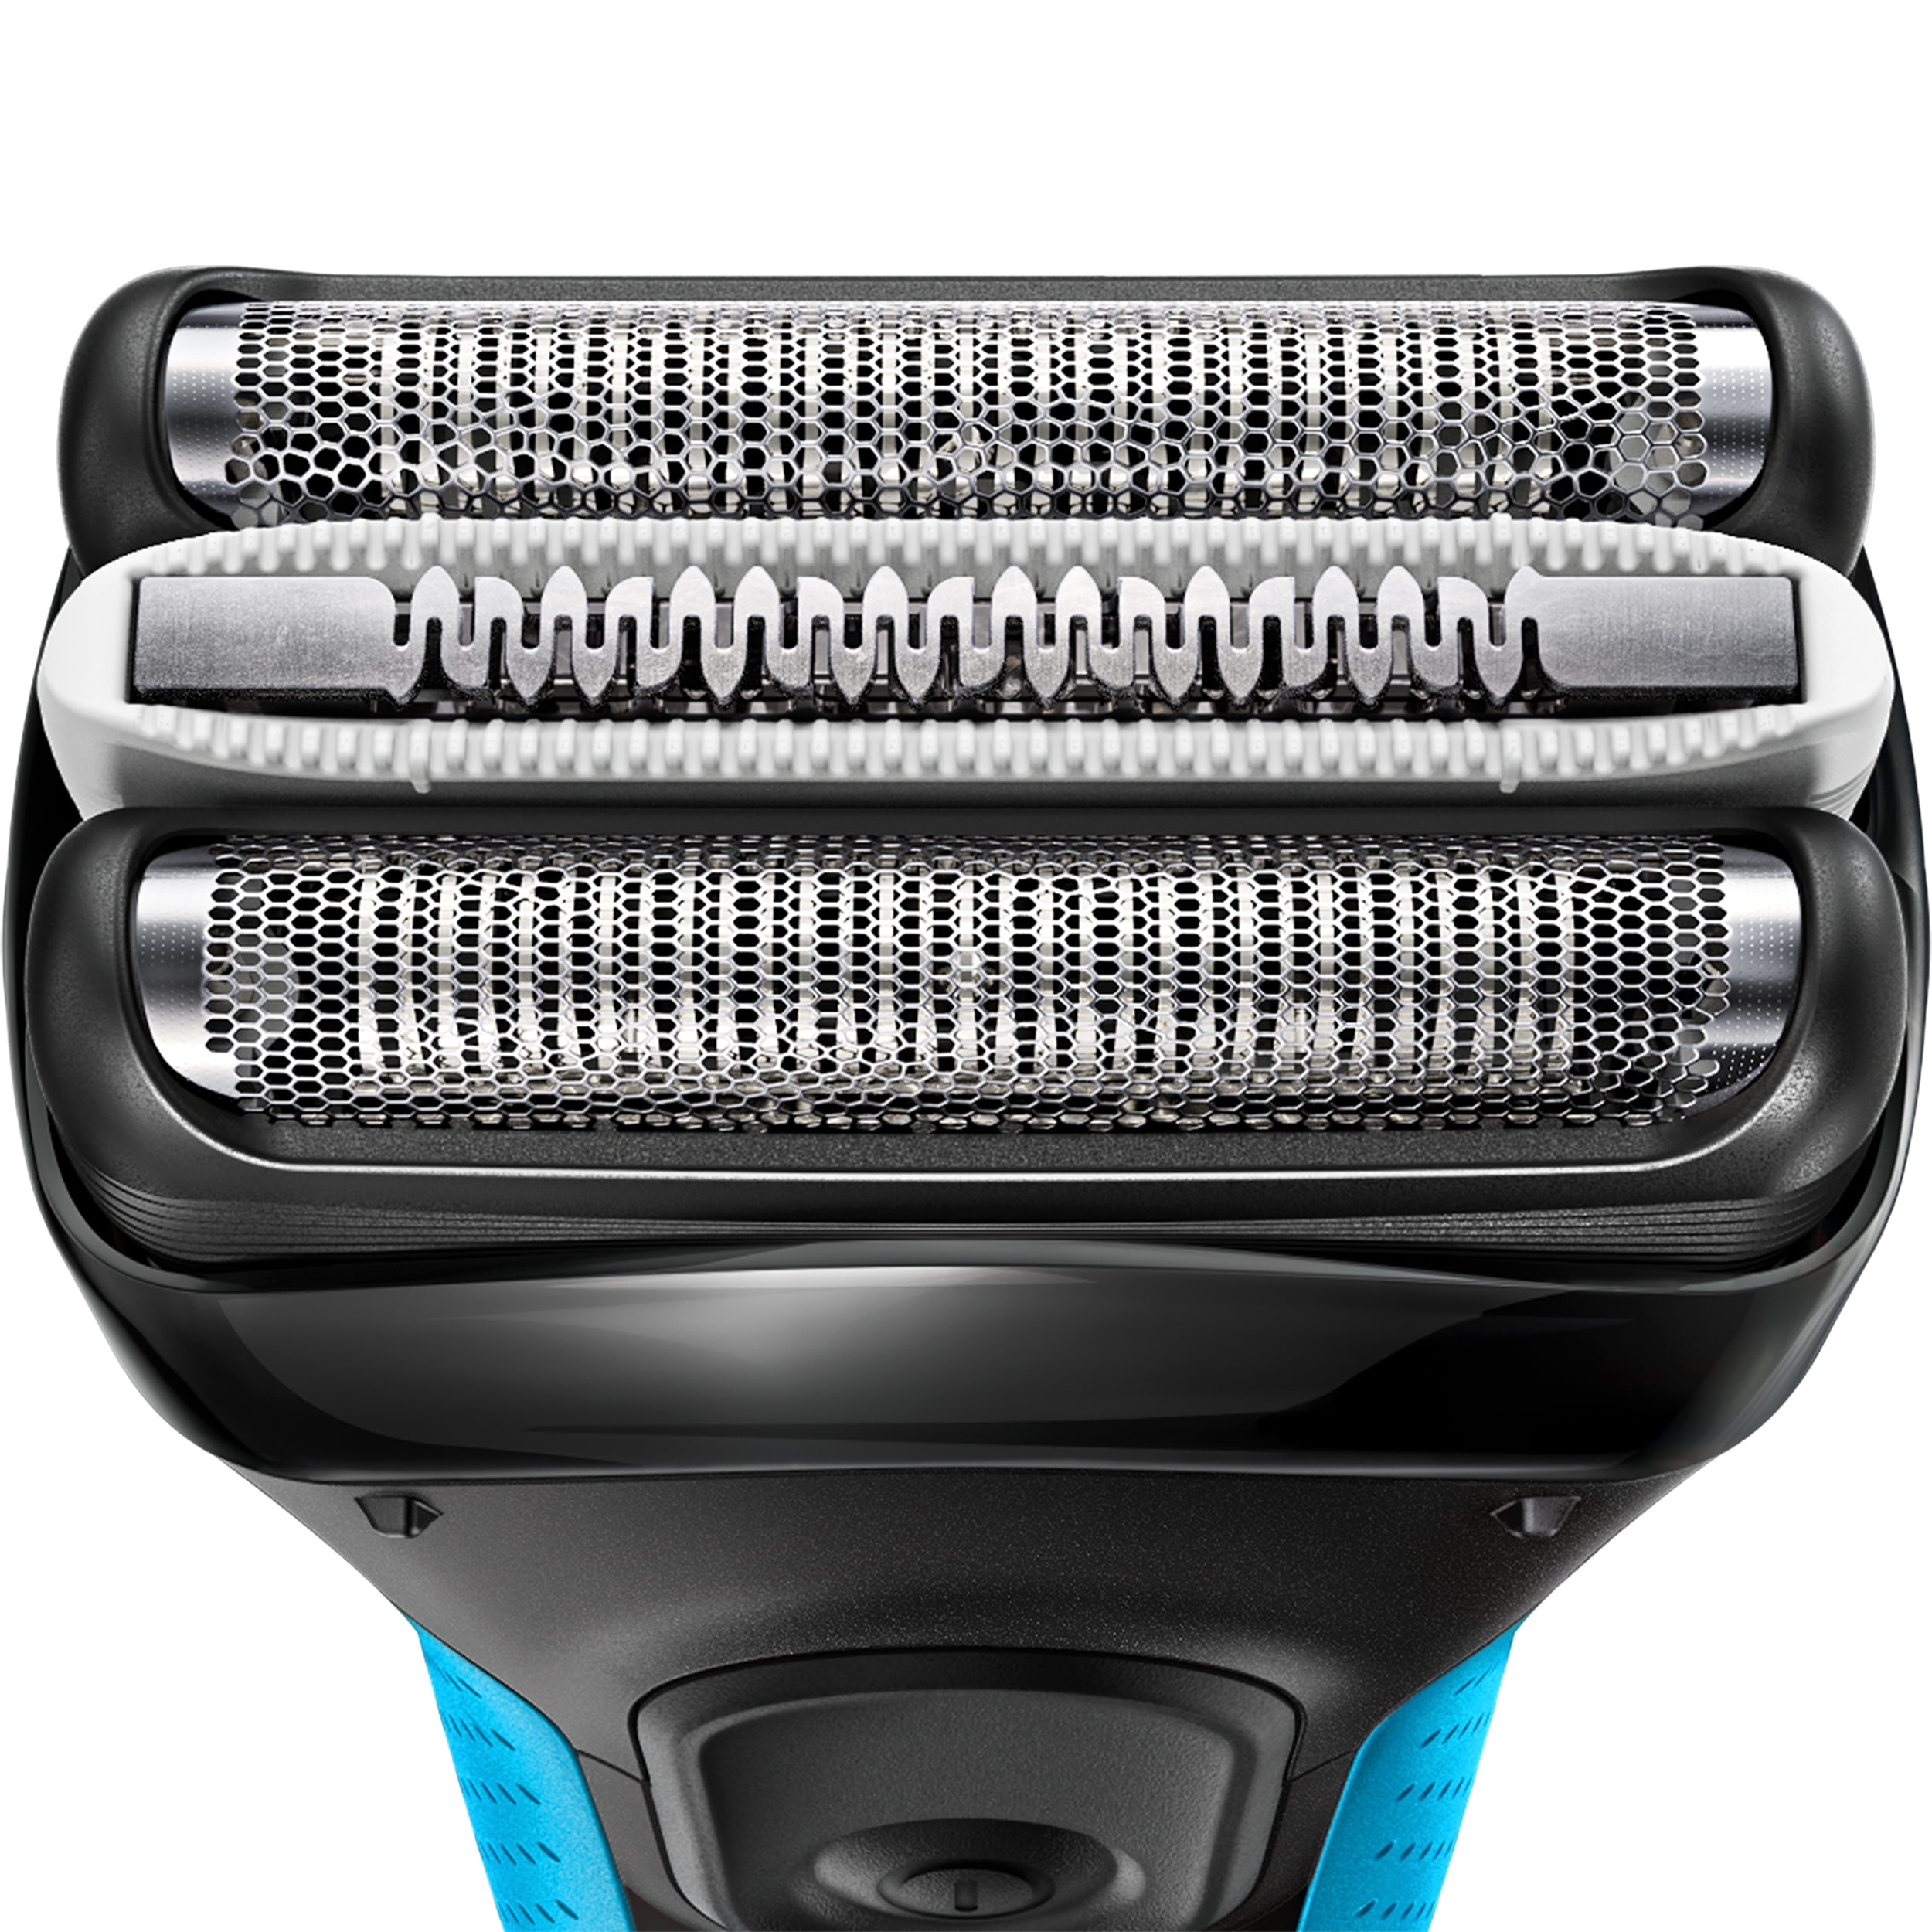 Braun Series 3 ProSkin 3040s Wet Dry Electric Shaver, Charging Stand